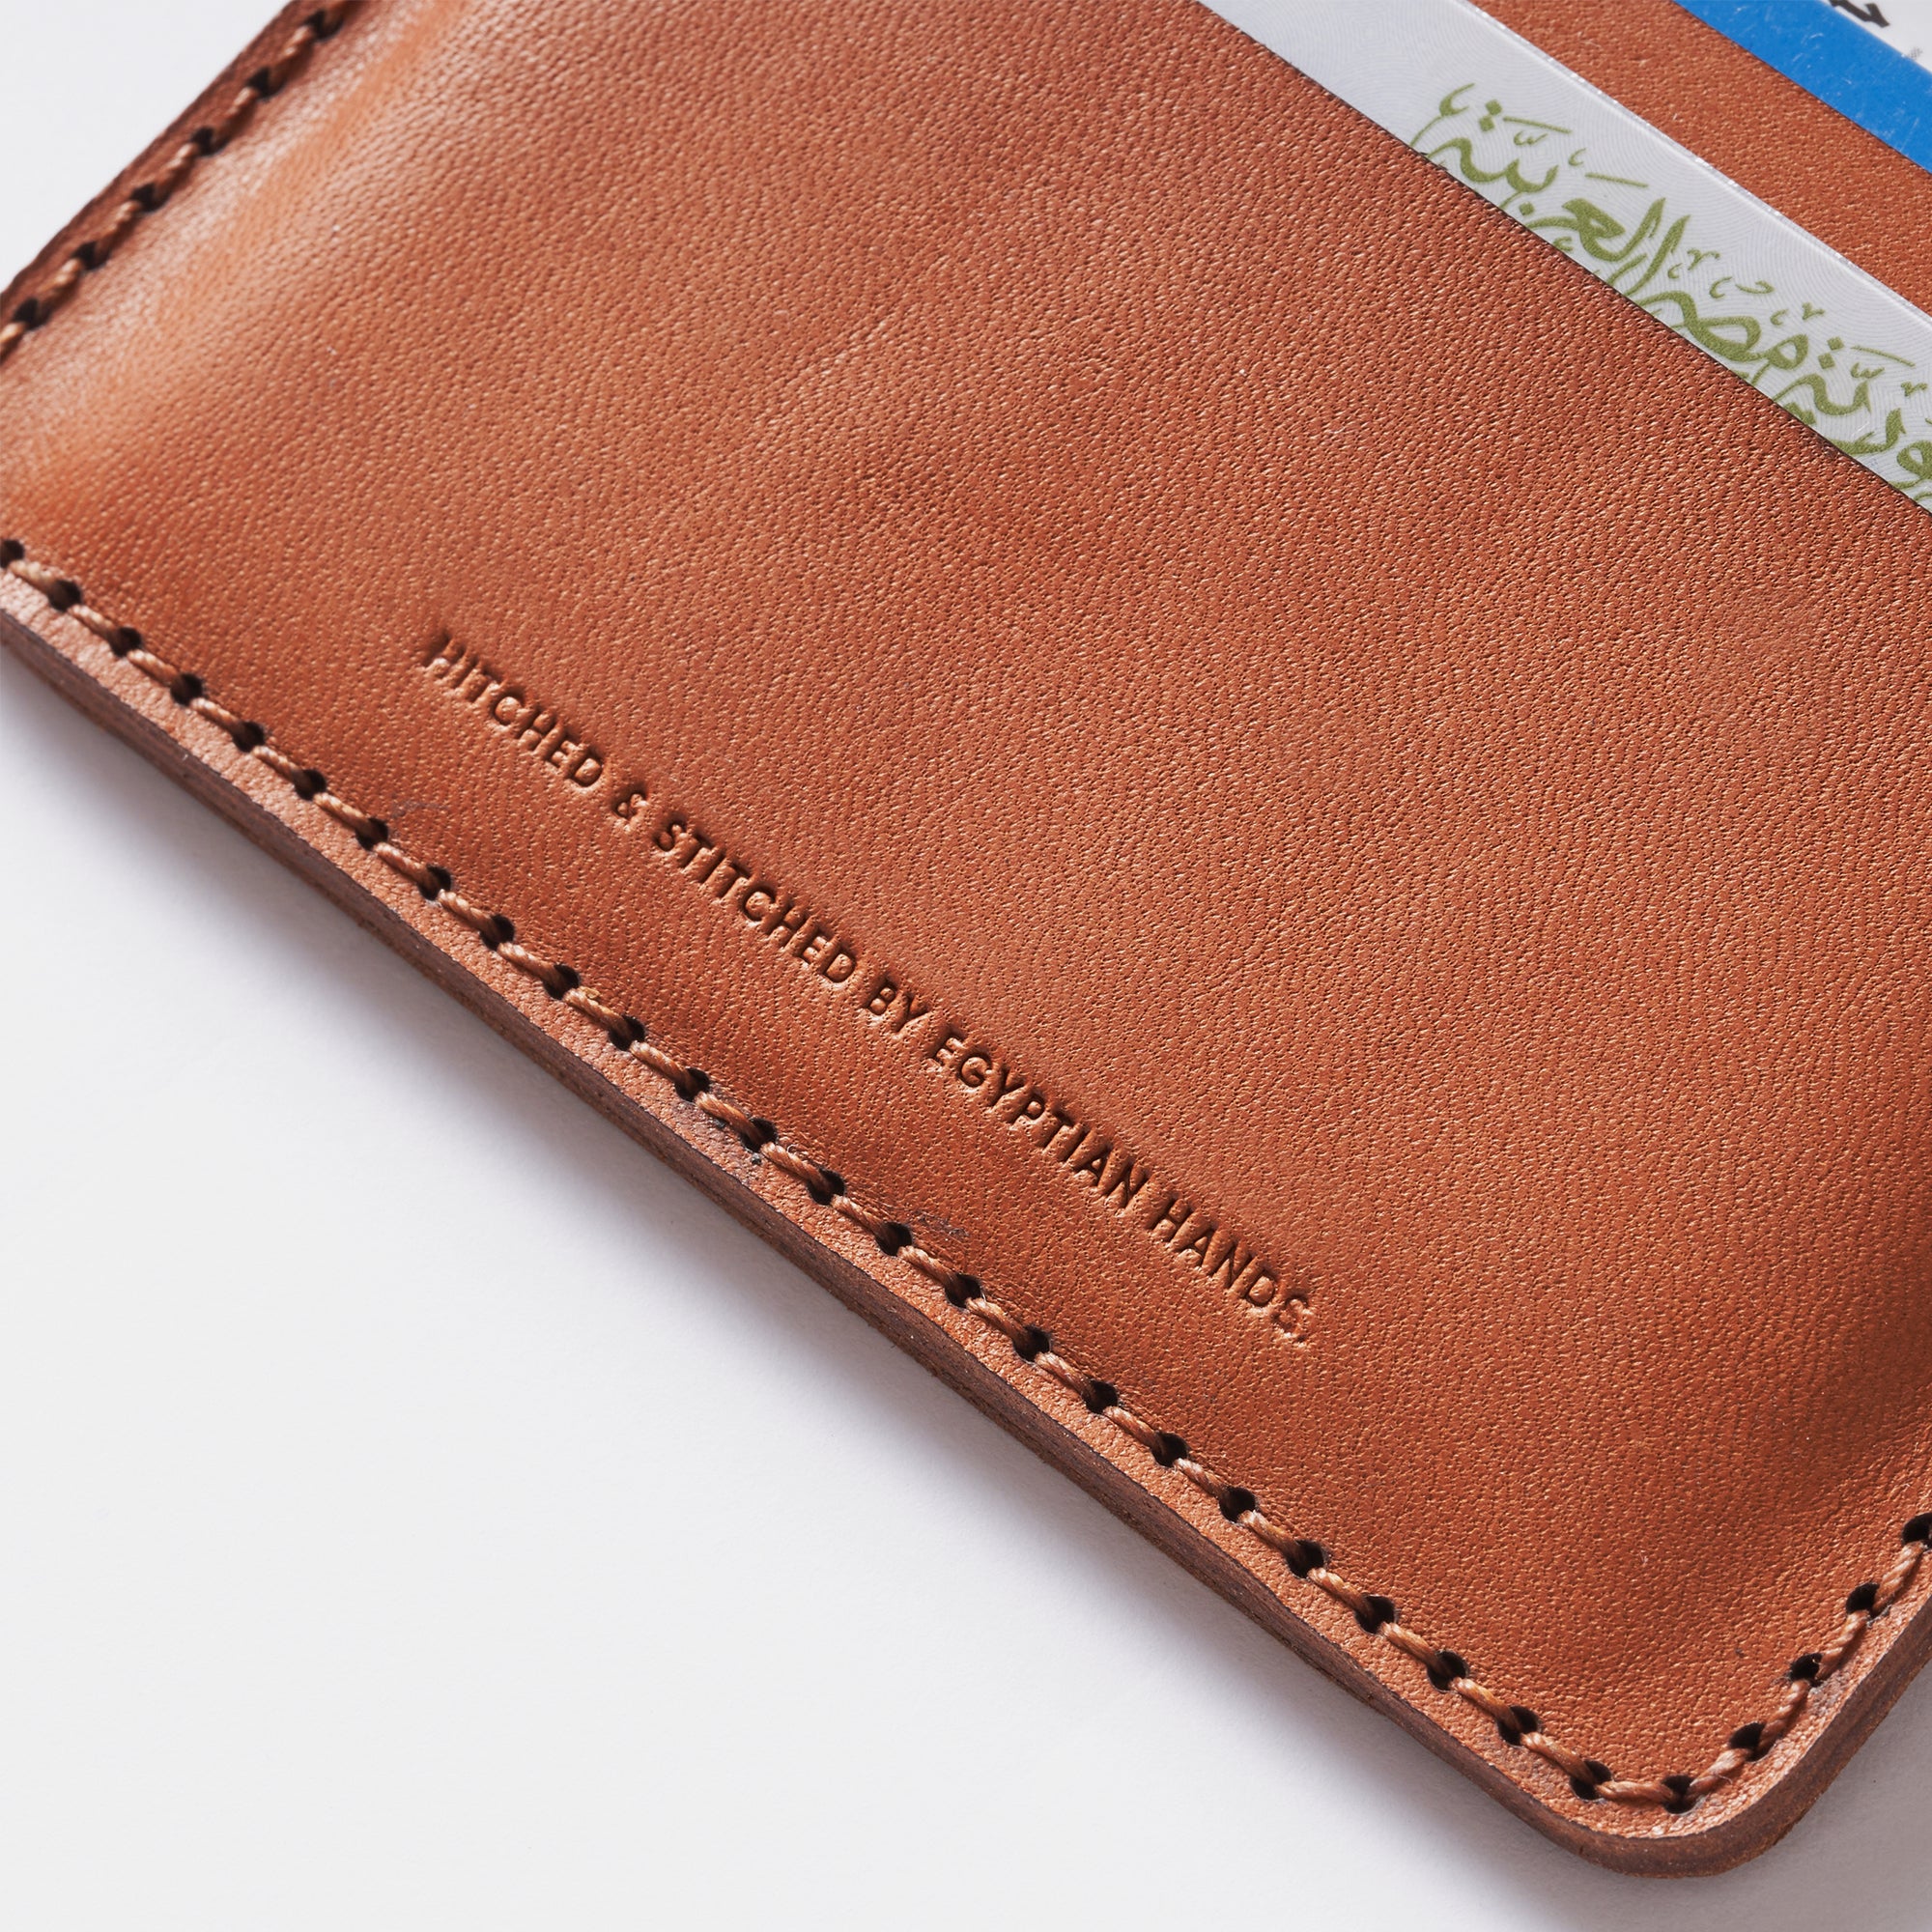 Brown leather bifold wallet with embossed text and visible stitching, partially filled with cards.